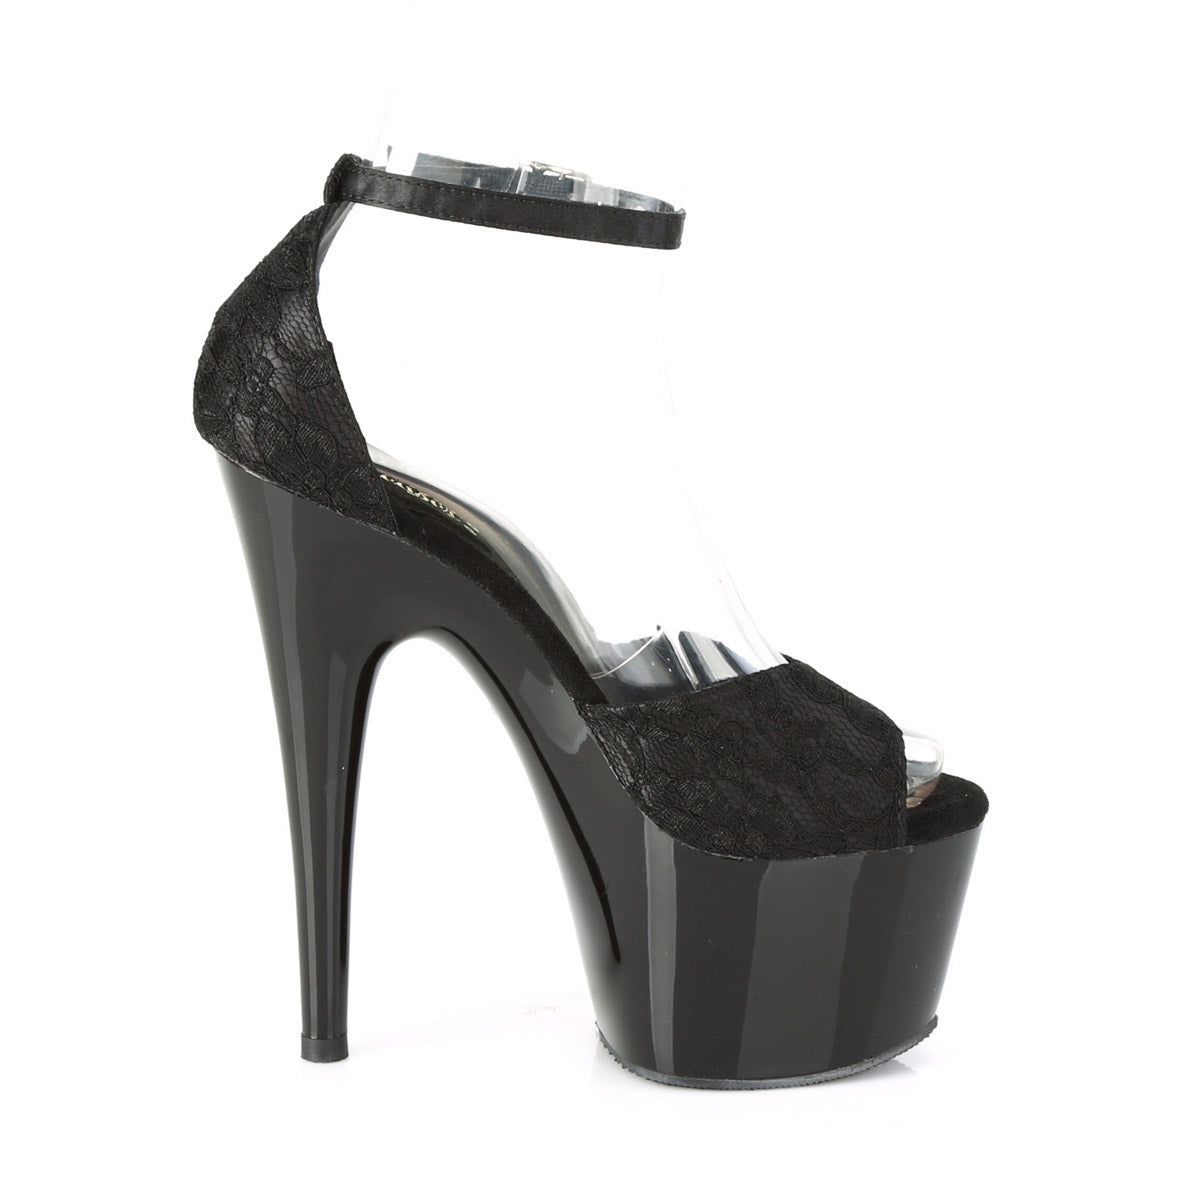 Sexy Open Toe Platform Stiletto Ankle Strap D'Orsay High Heels Shoes Pleaser Pleaser ADORE/768